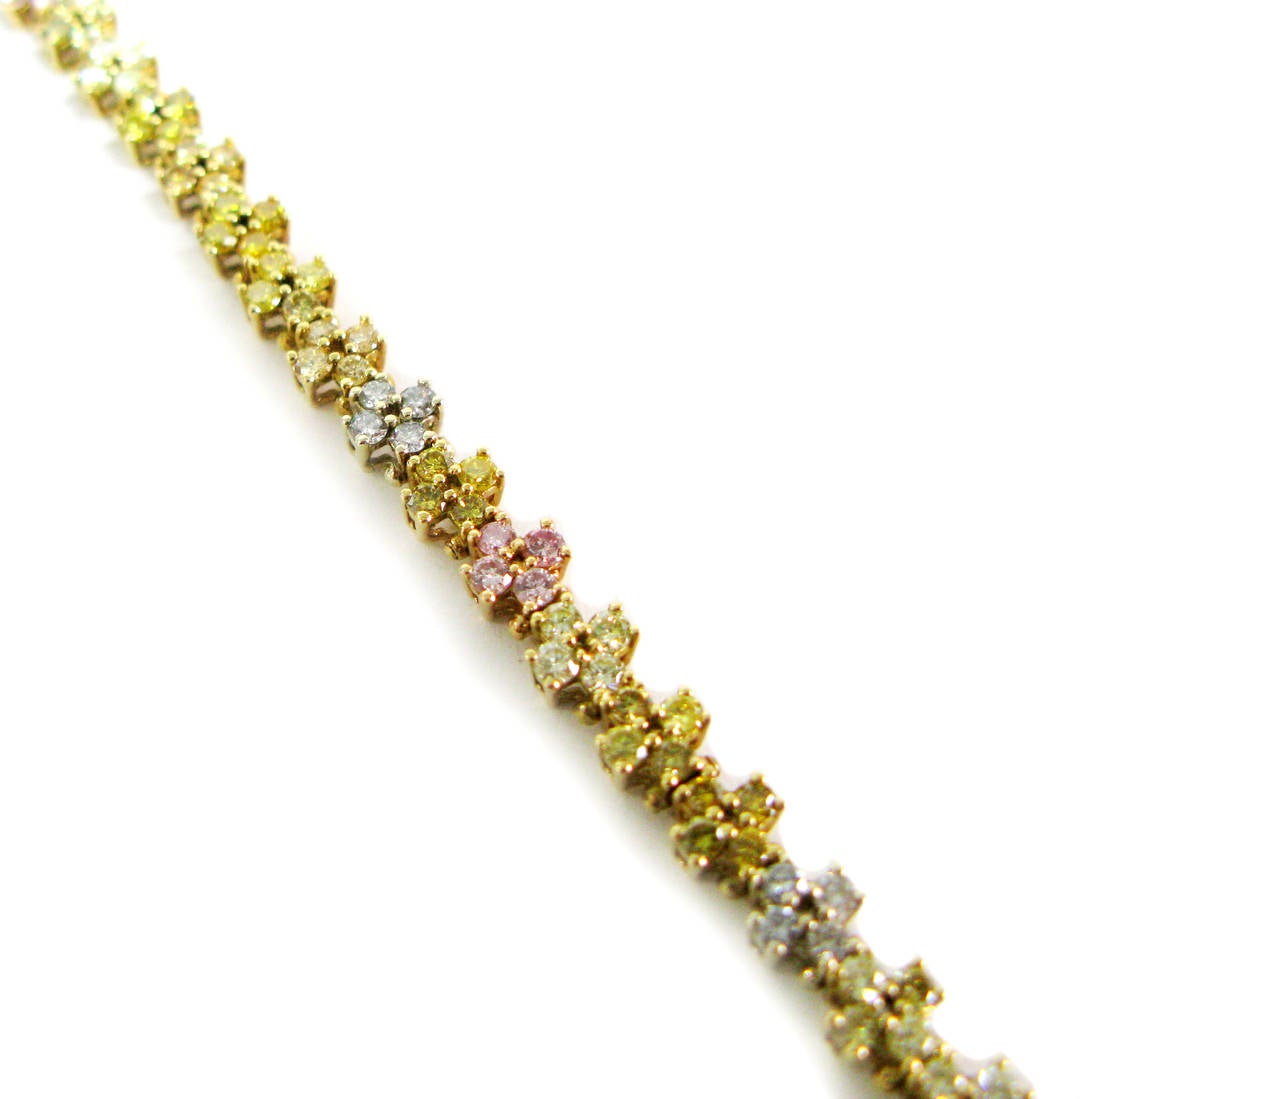 This unique 18kt tri-color gold piece offers a twist on the classic tennis bracelet. It features clusters of four round brilliant diamonds in natural fancy colors including yellow and pink mixed with white for a total carat weight of 4.40cts. This